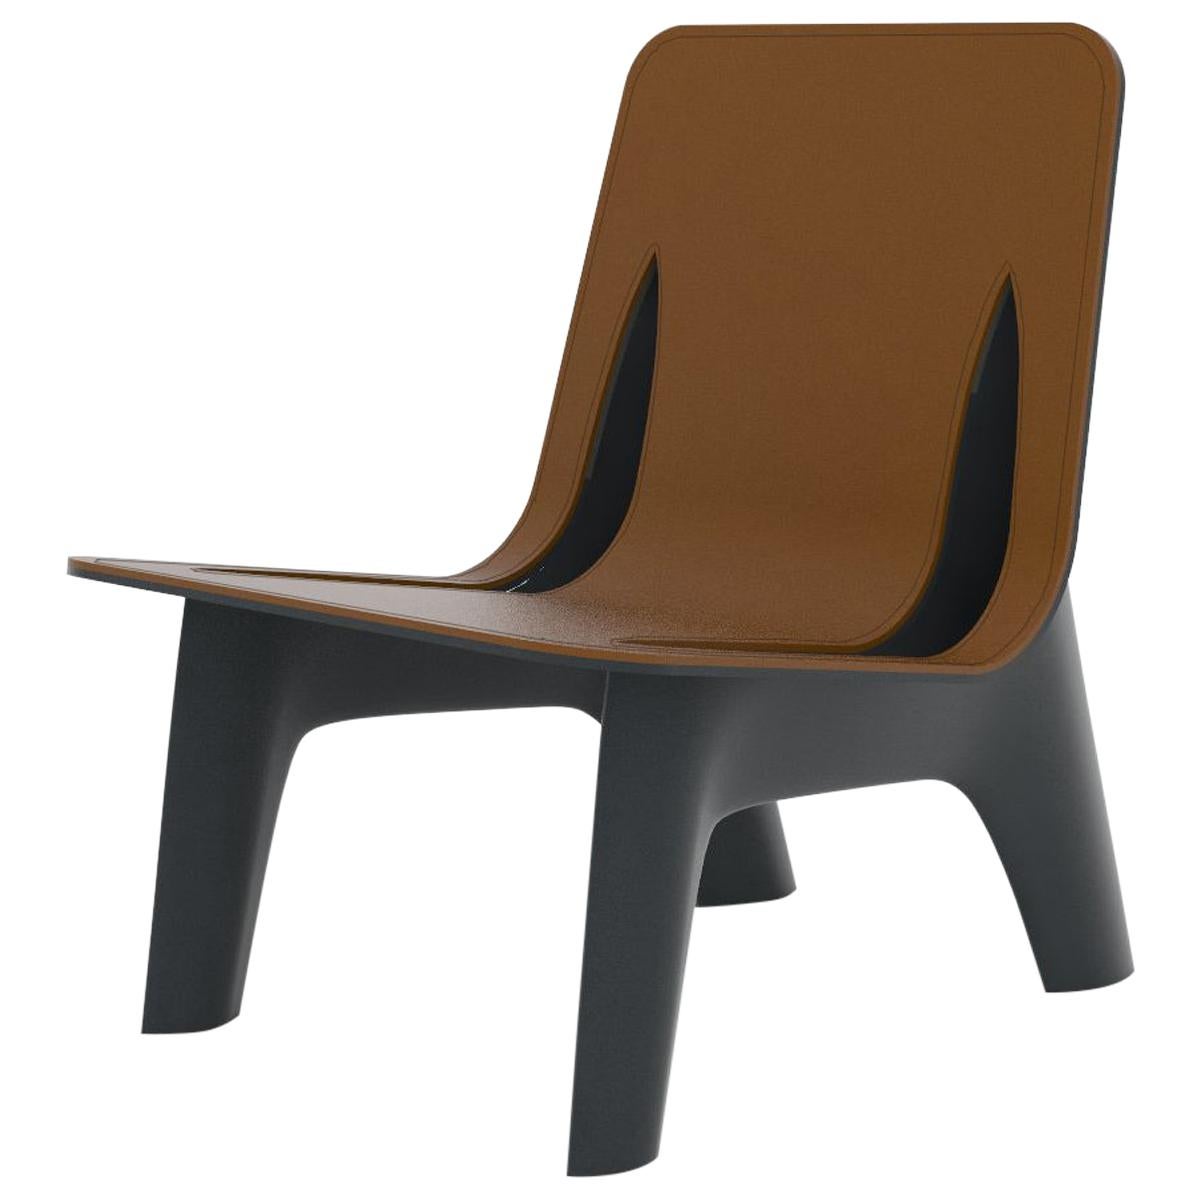 J-Chair Lounge Polished Graphite Grey Color Carbon Steel and Leather Seating